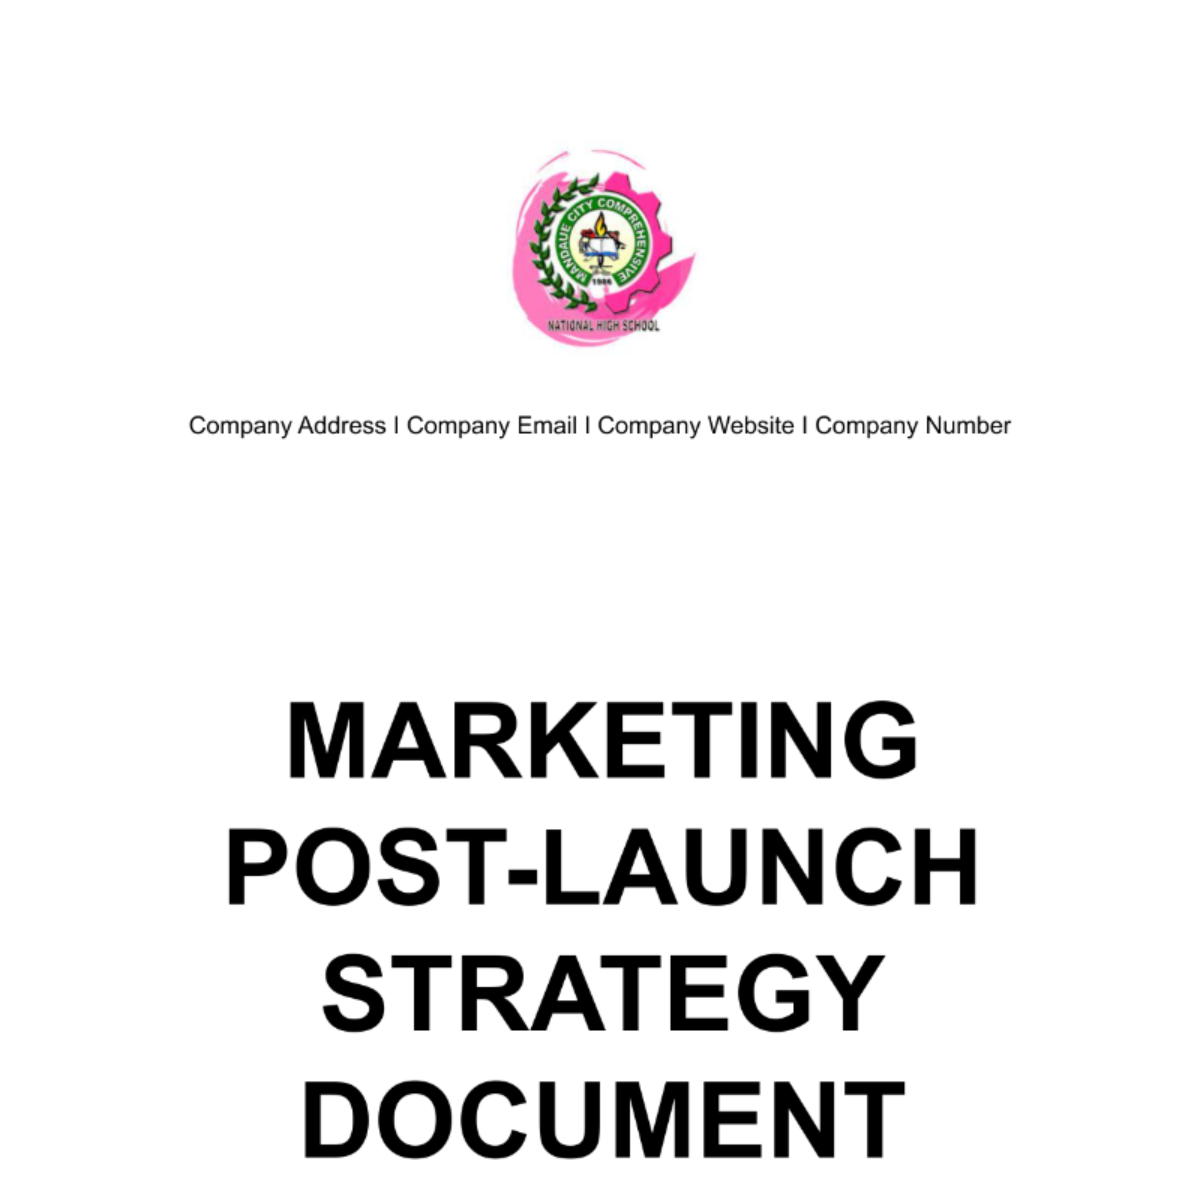 Marketing Post-Launch Strategy Document Template